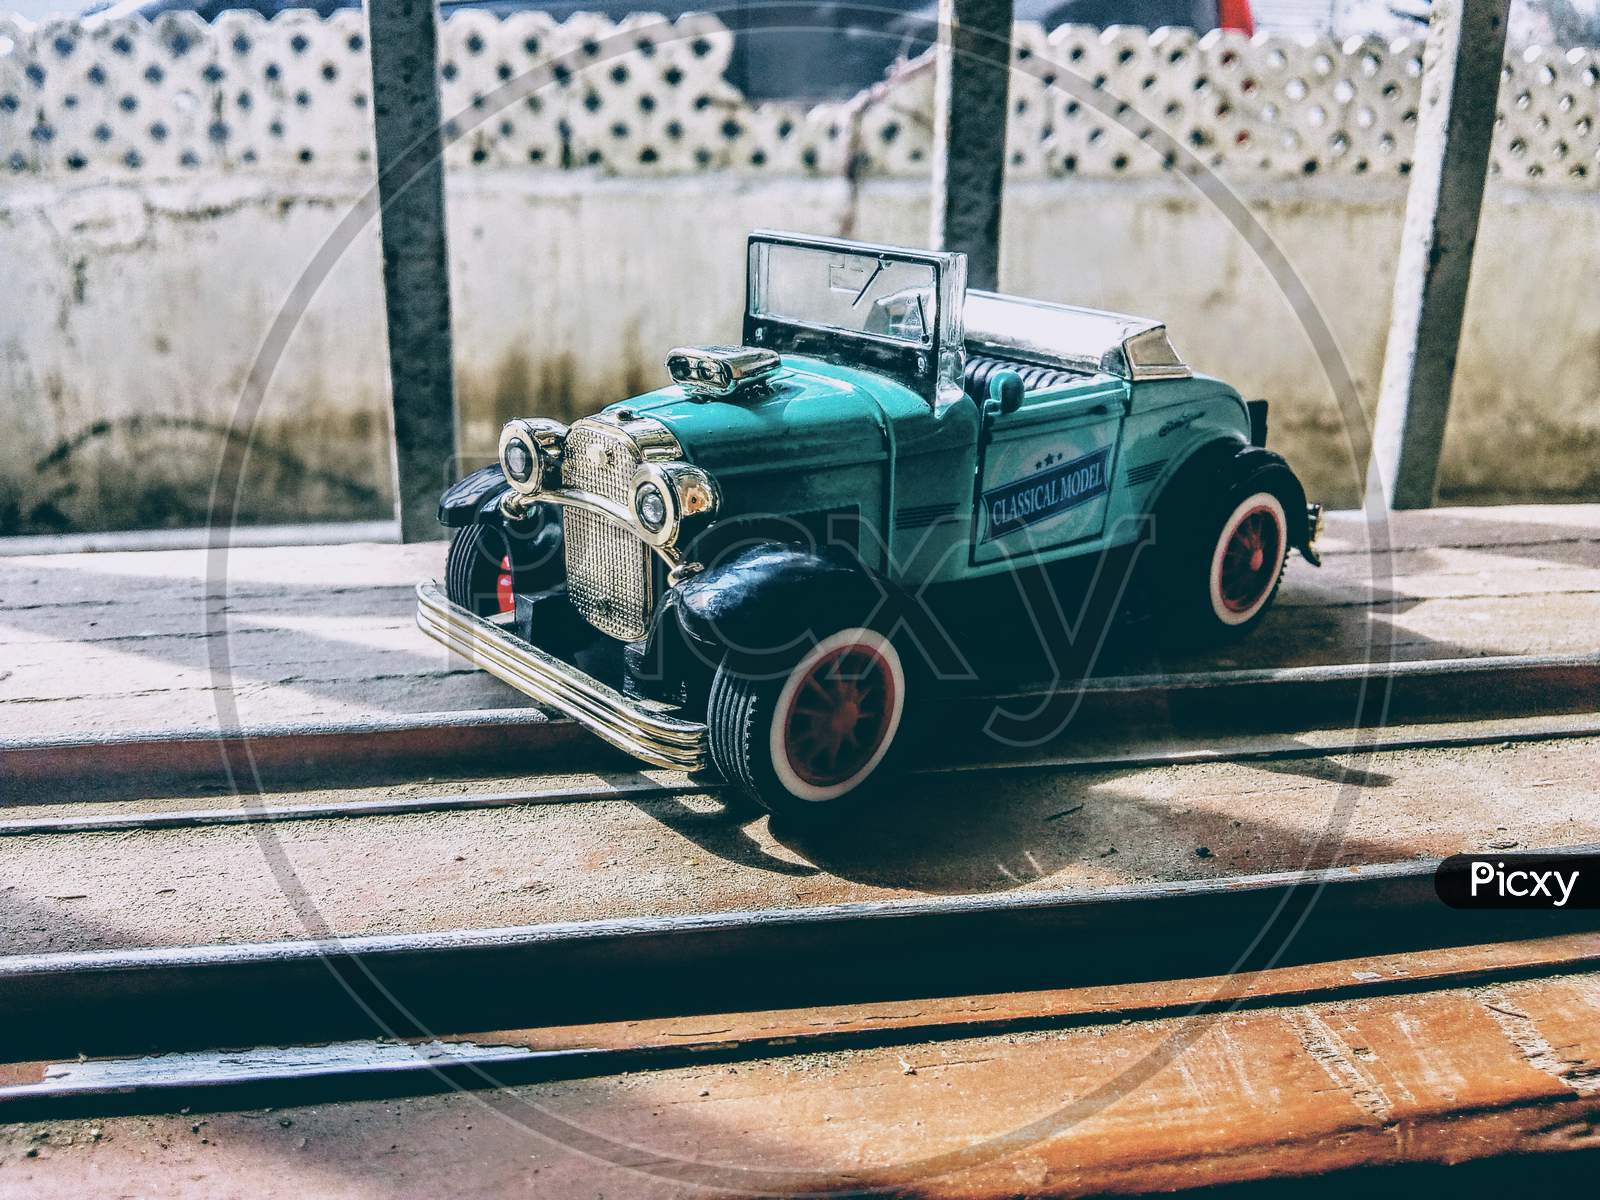 photo of a toy car